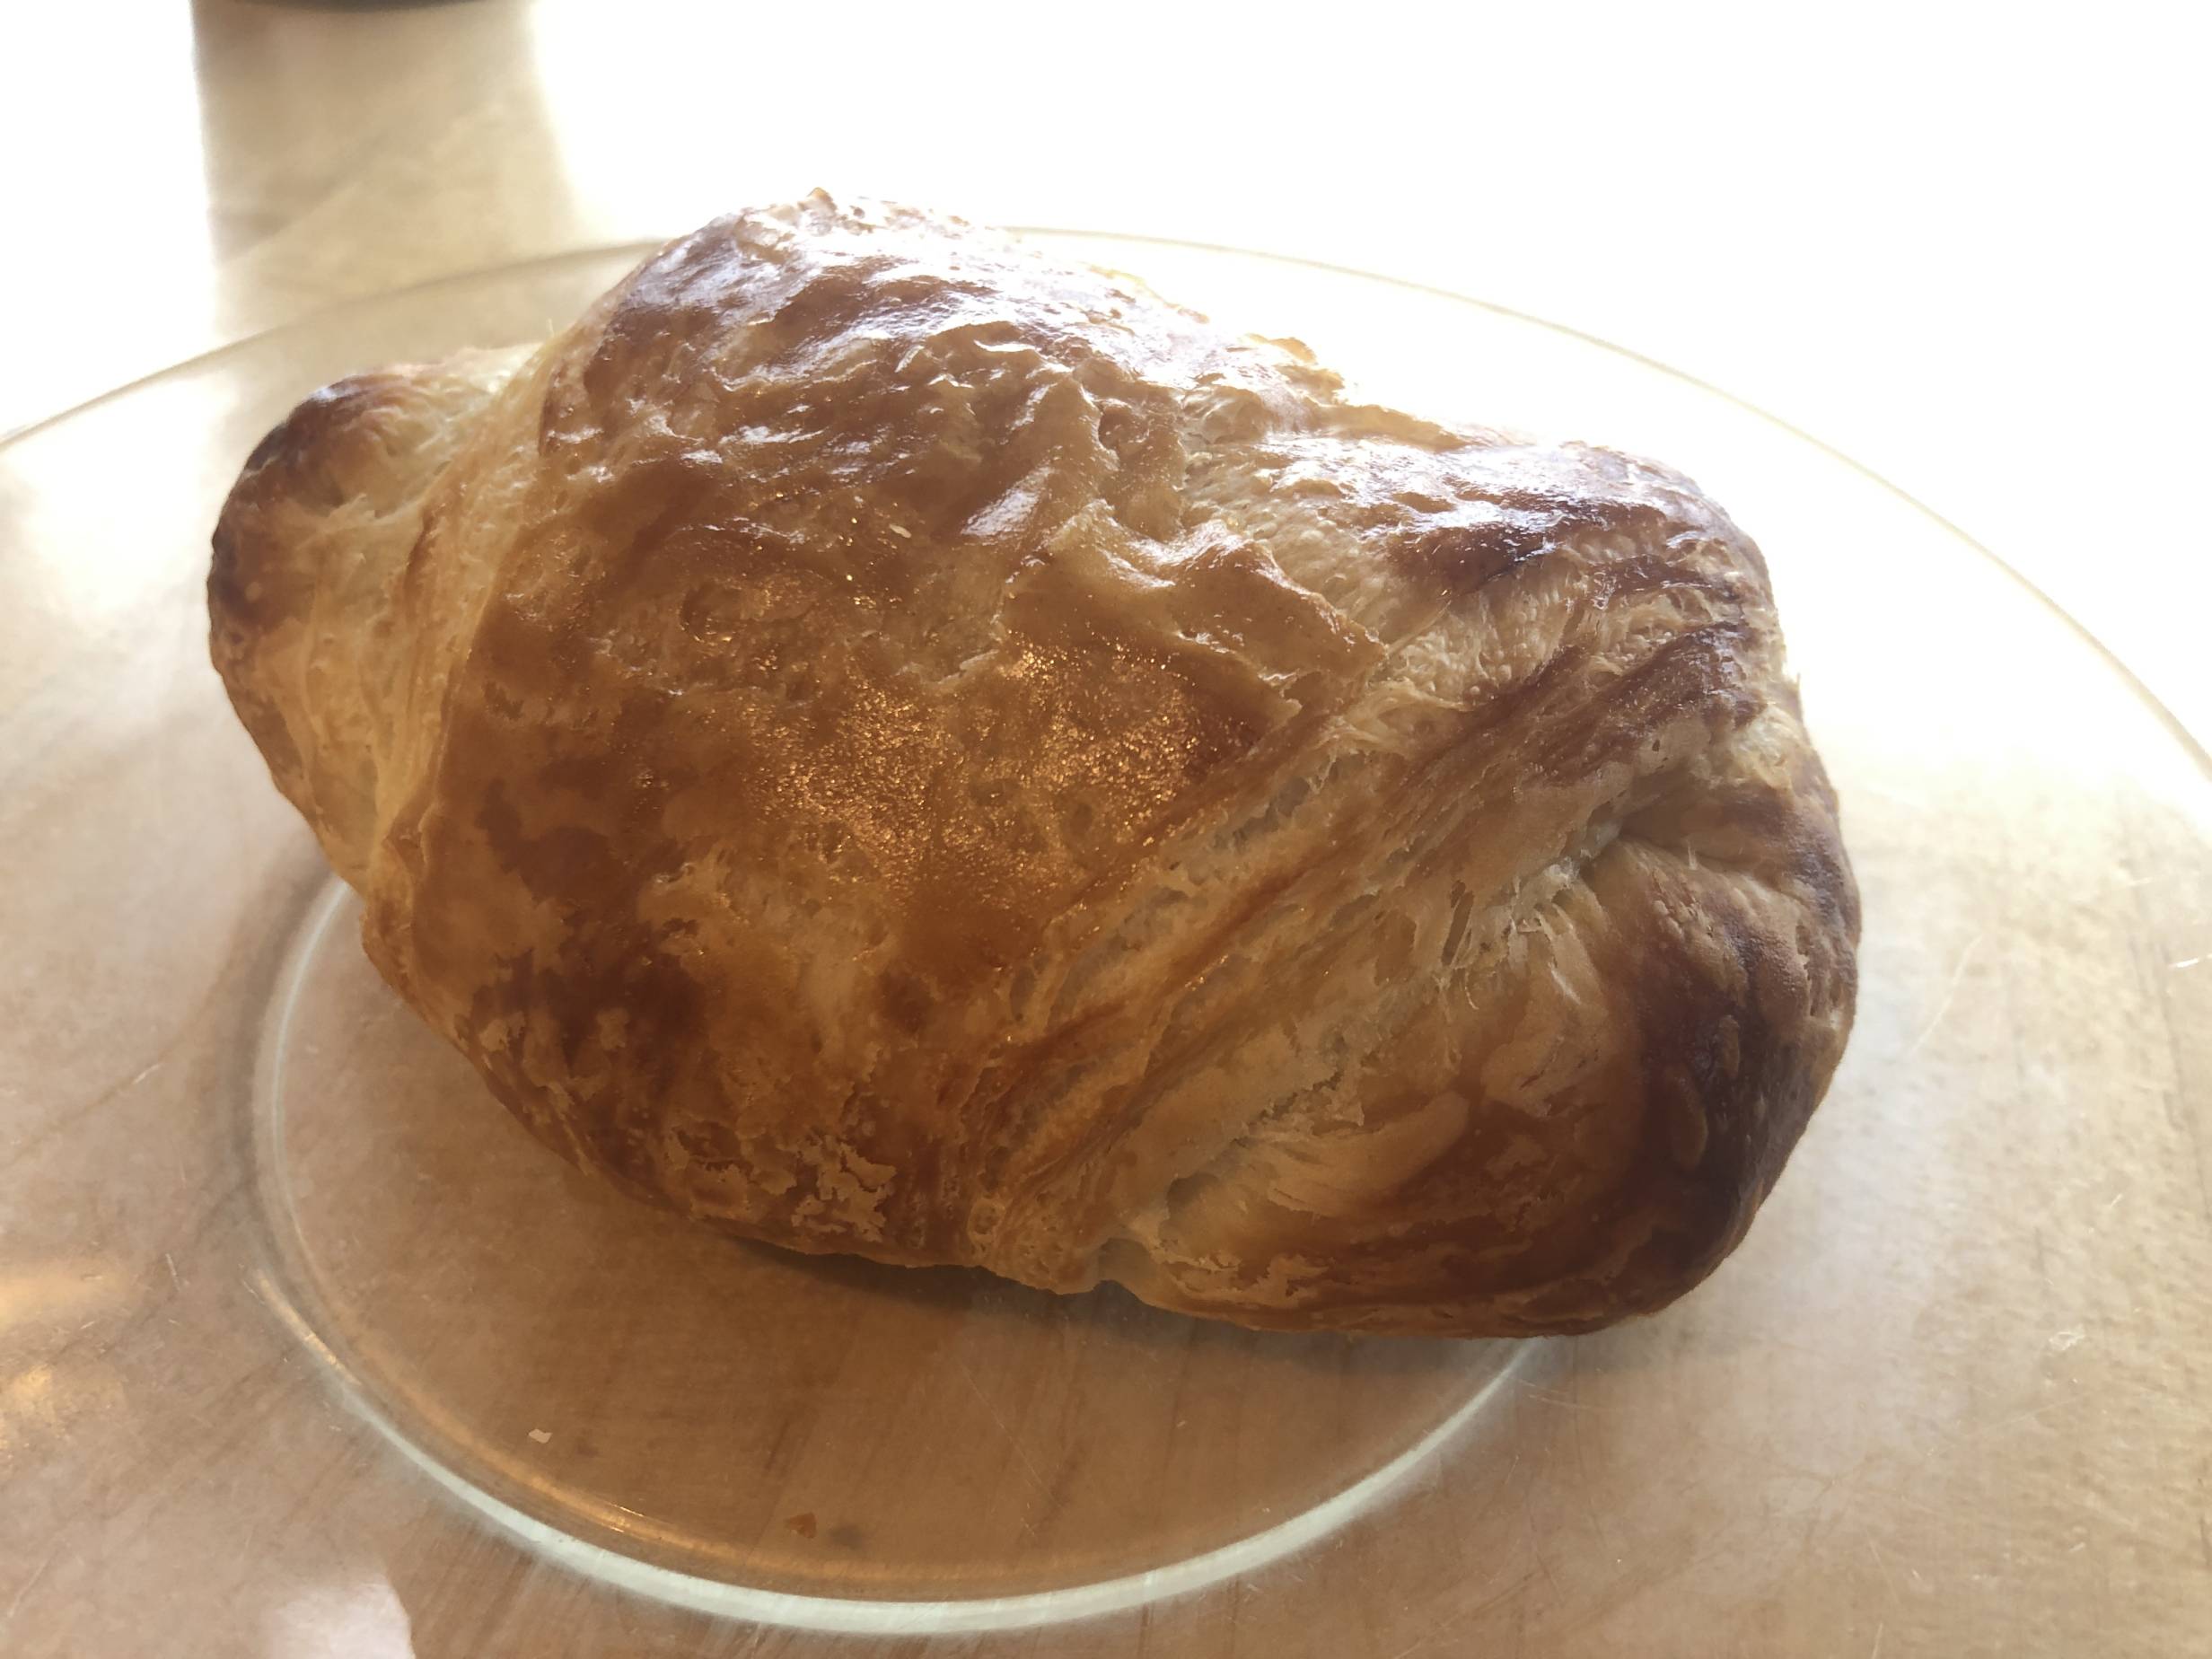 A lightly toasted croissant sits on a small glass plate on a wooden table at Art Mart. Photo by Alyssa Buckley.